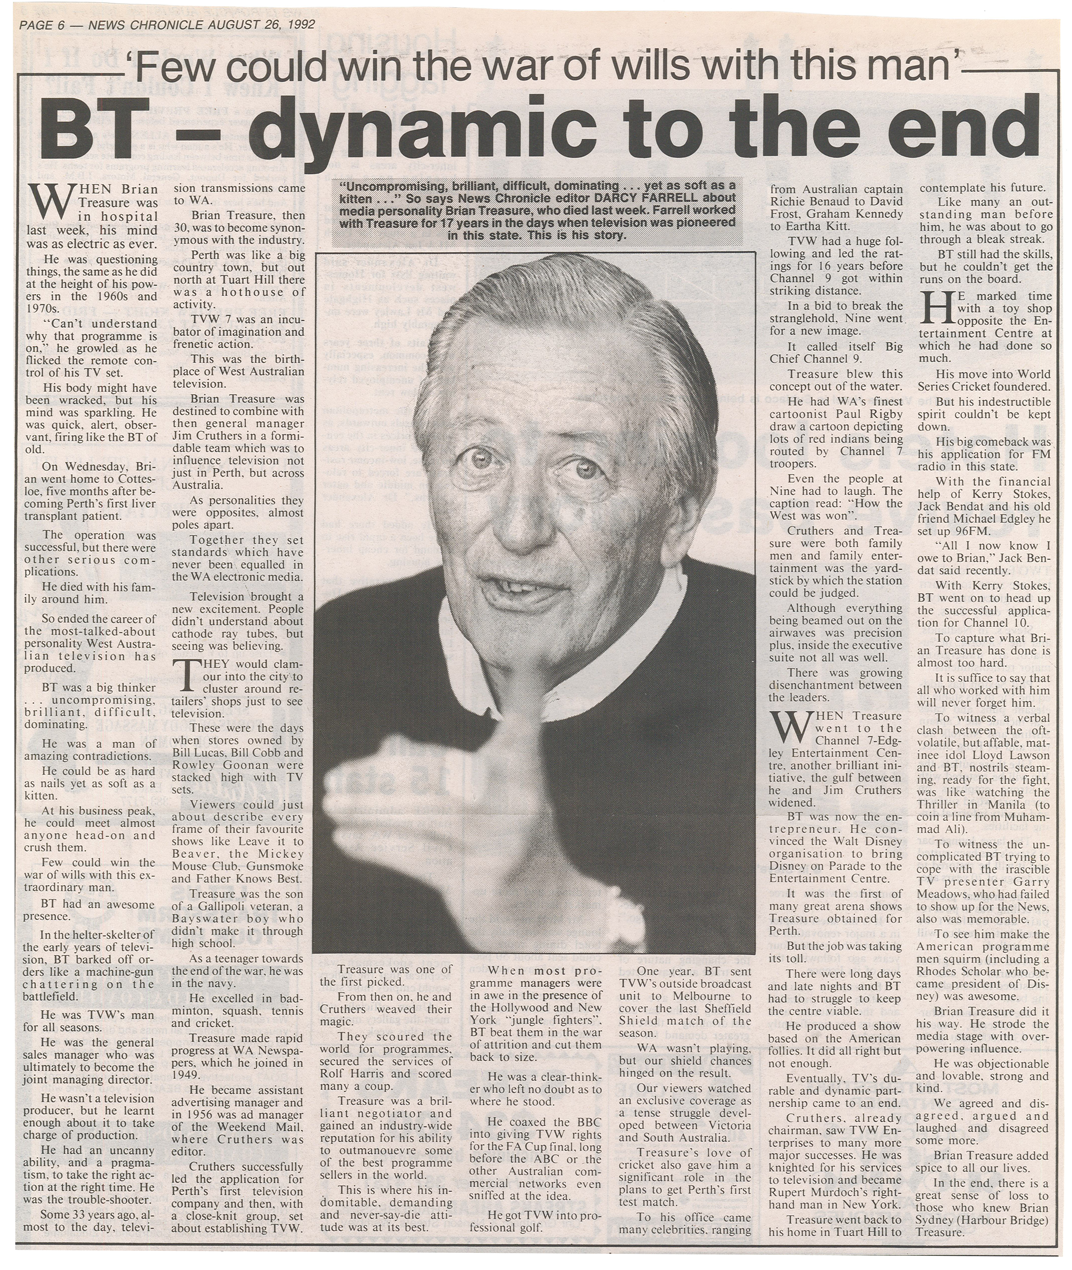 1992.08.26 - Article - BT dynamic to the end - News Chronicle.png